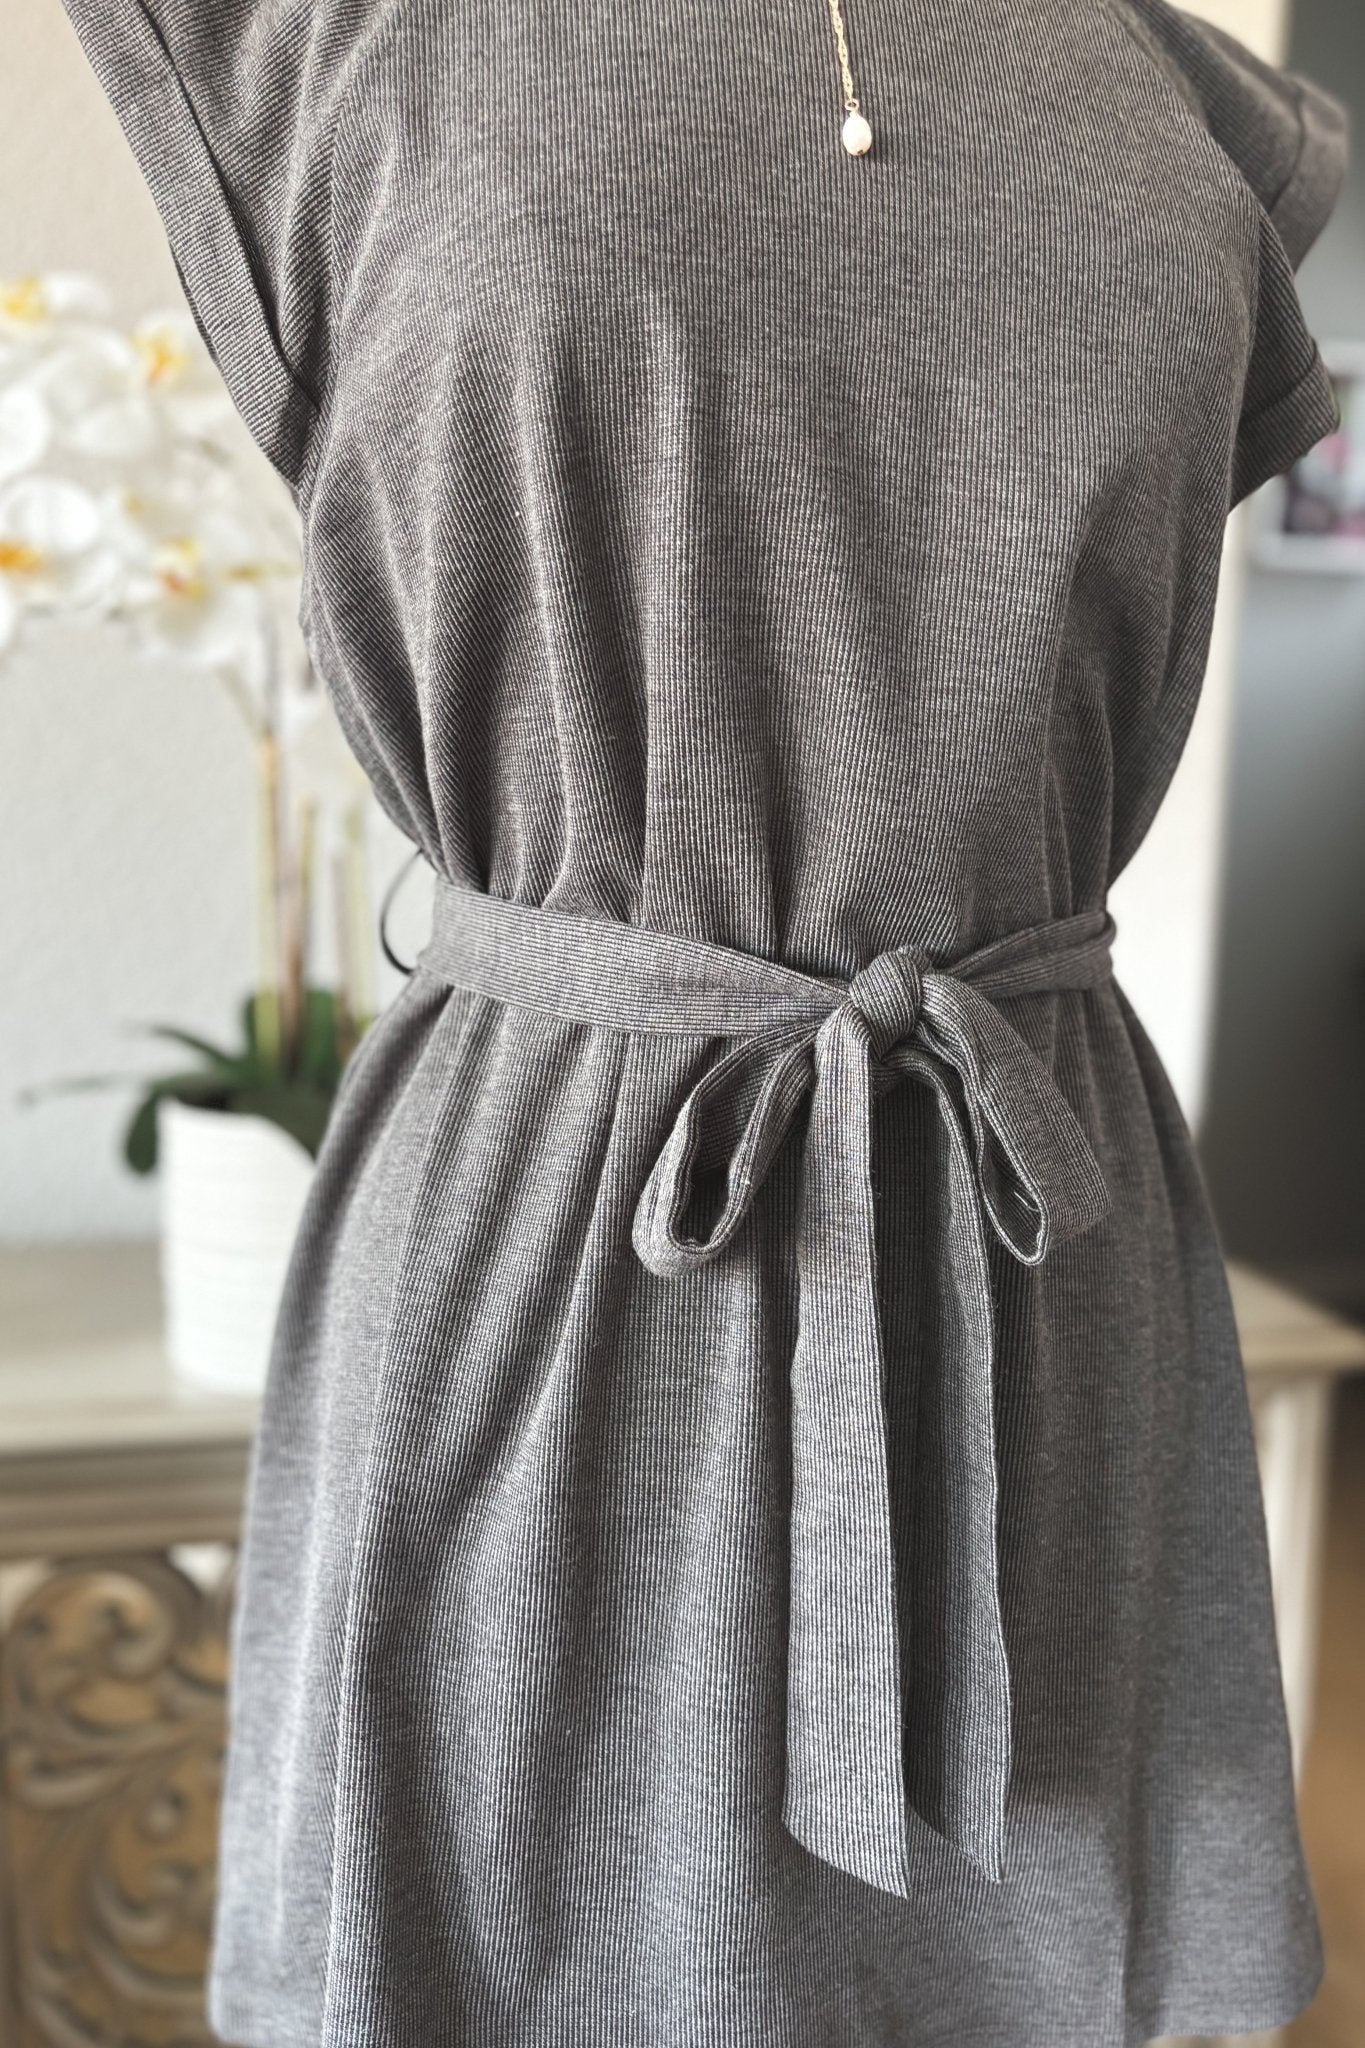 Women's Athleisure Belted Mini Dress | Travel Outfits | Charcoal Gray - Women's Dresses - Blooming Daily